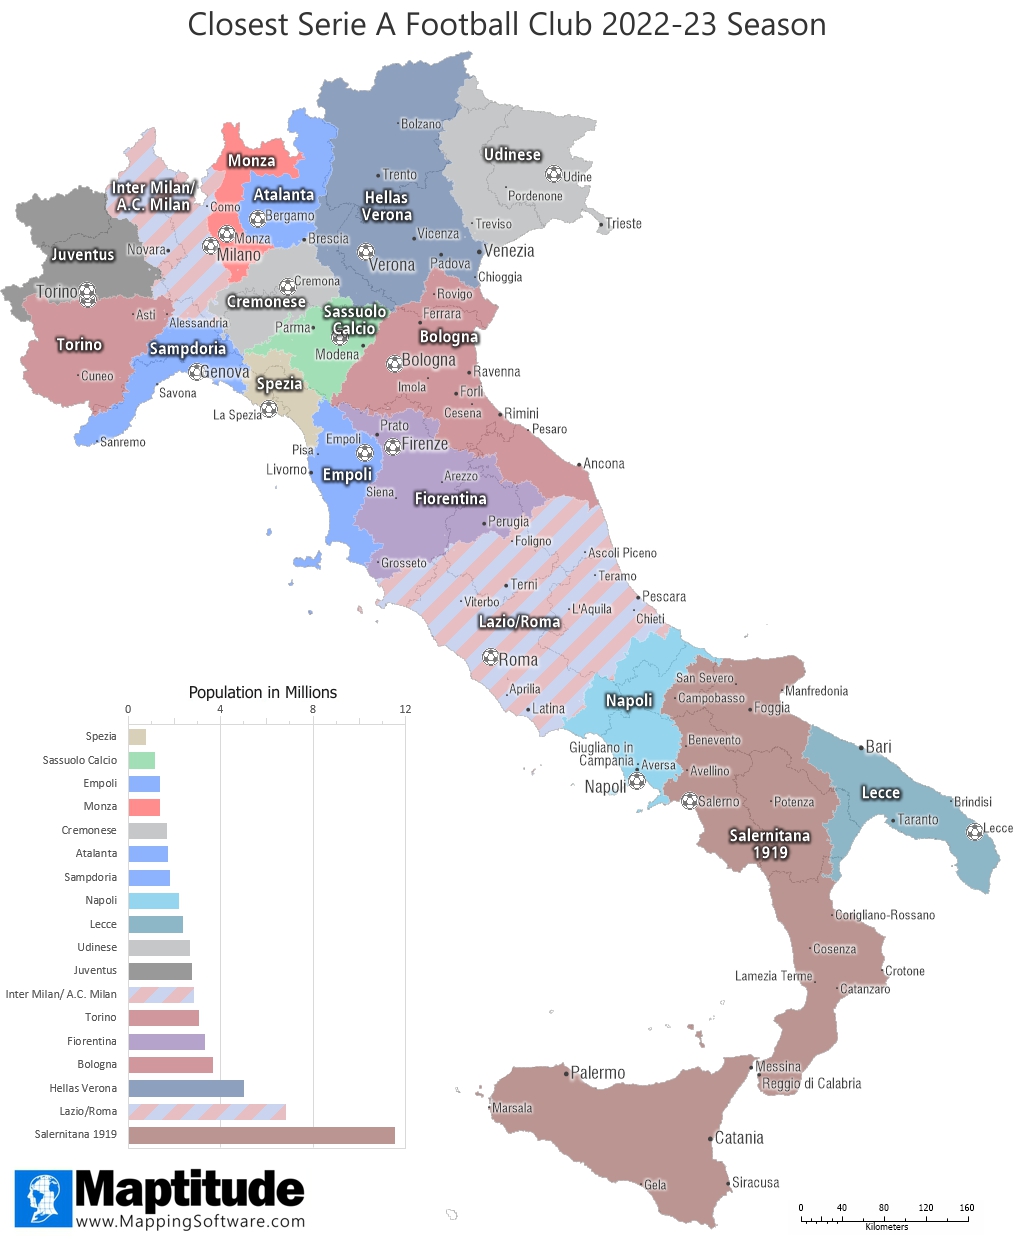 Maptitude mapping software infographic showing the Closest Serie A Football Club by drive time